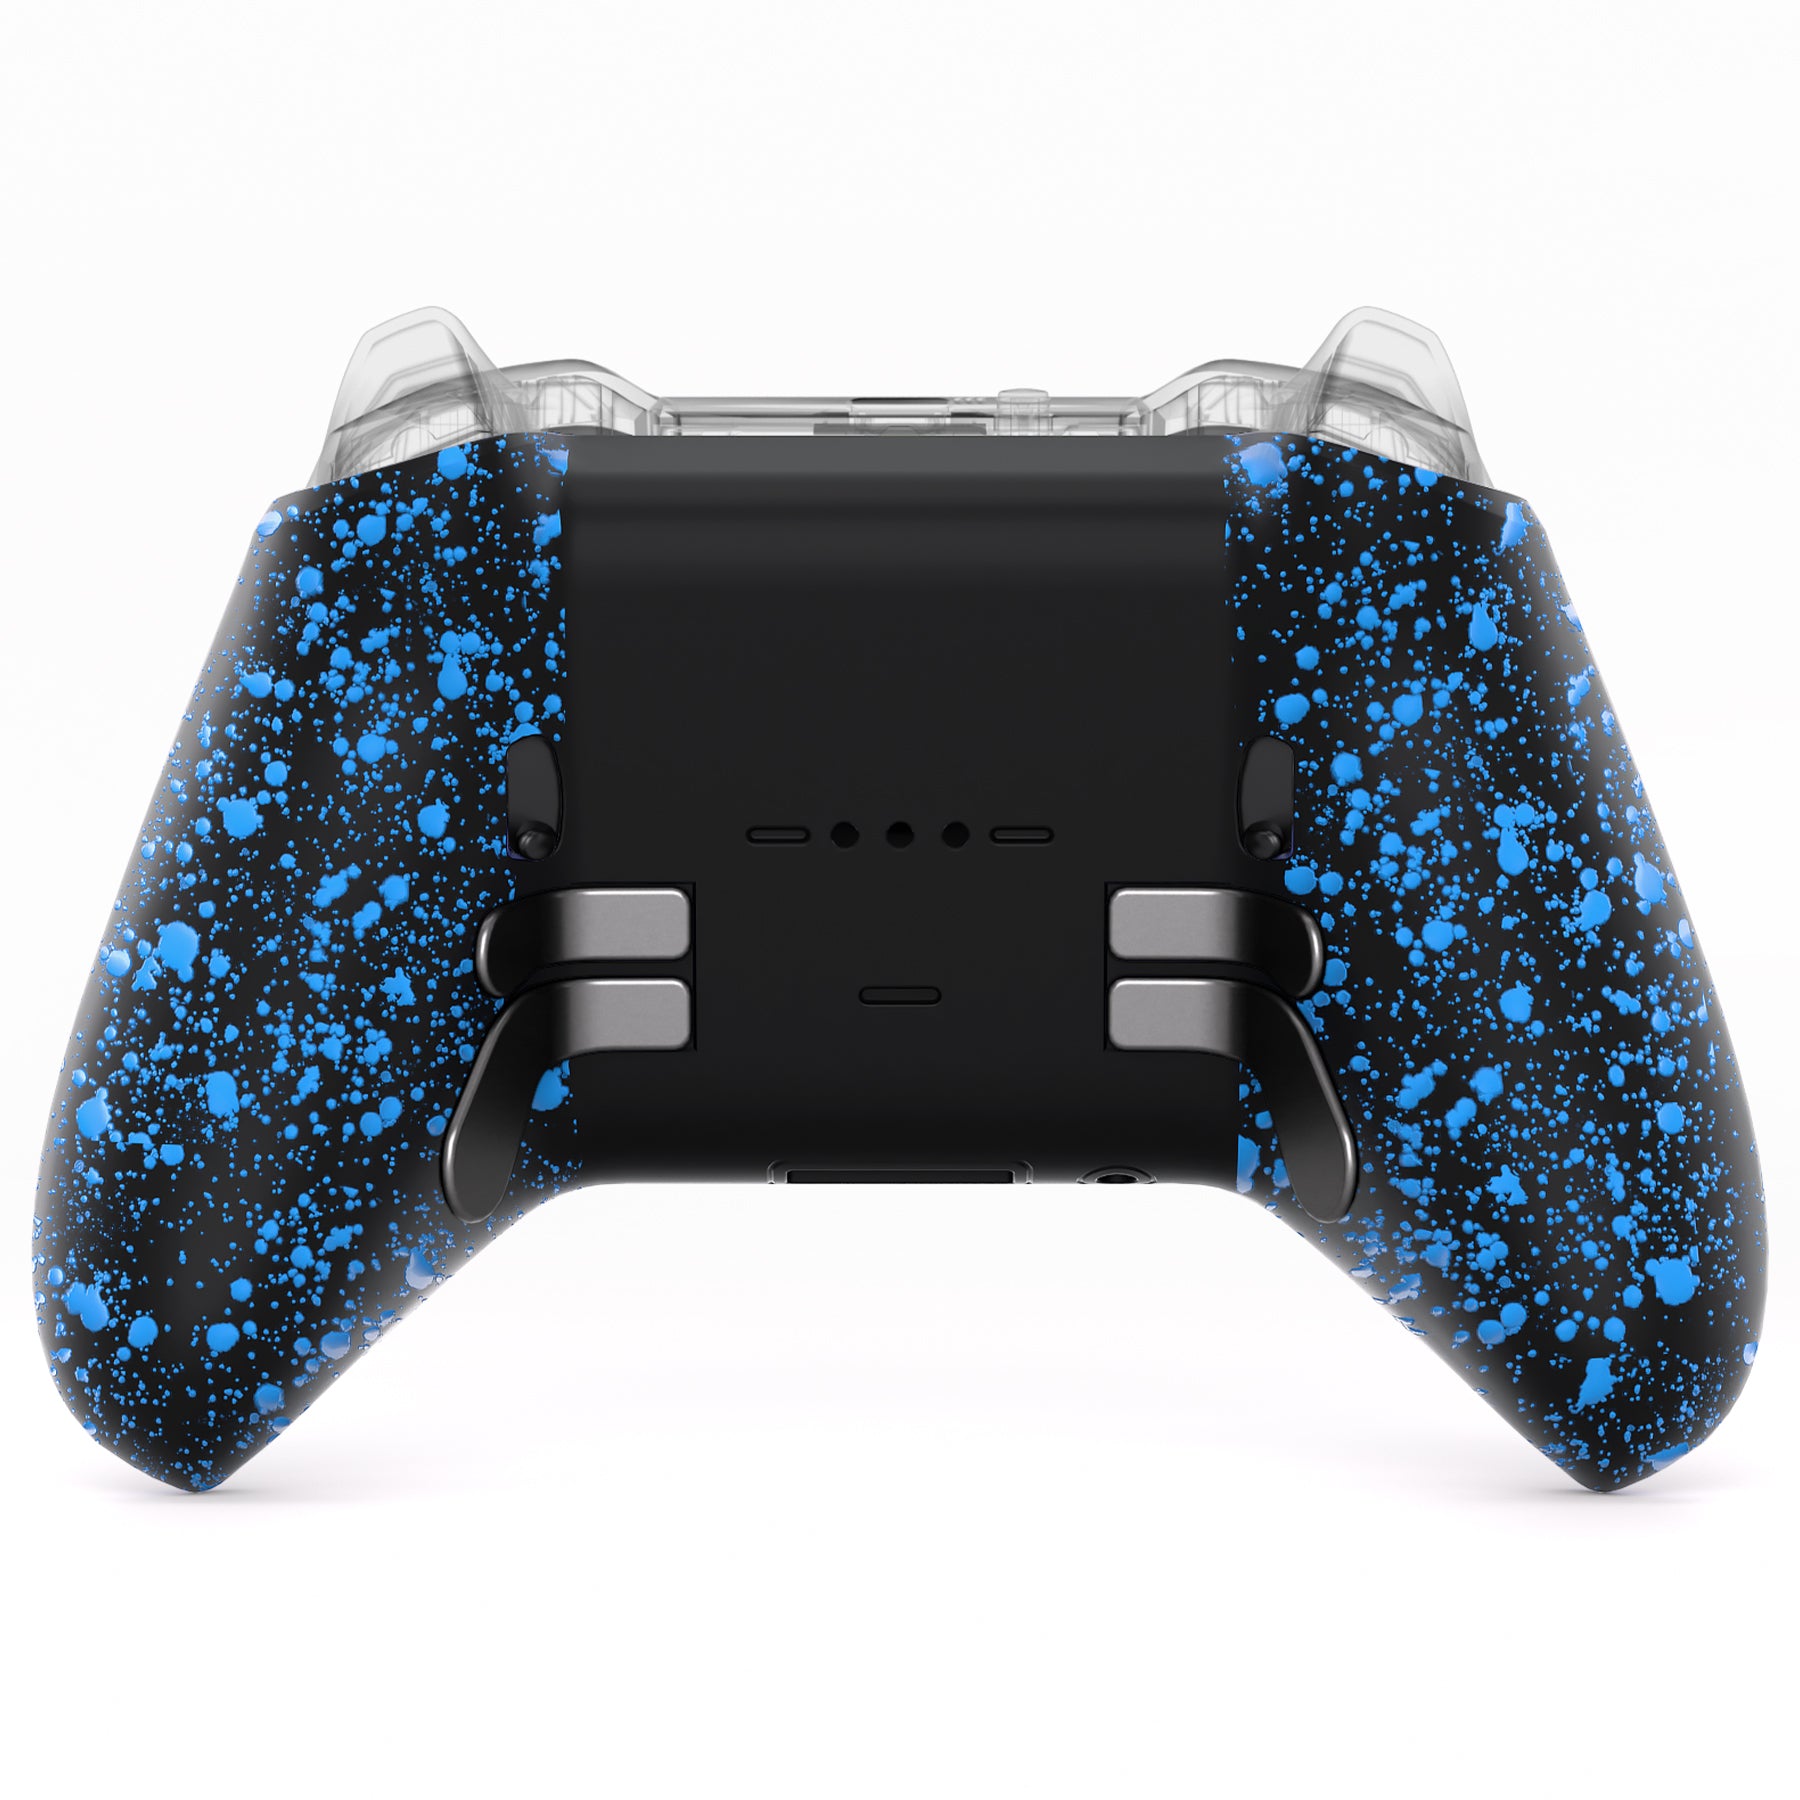 Replacement for WITHOUT for Custom Xbox 1797 Retail eXtremeRate Shell Textured Housing Core – Blue Xbox Case Series Controller, eXtremeRate Series - Controller Shell 2 Wireless Elite Elite Controller 2 Model Bottom Cover